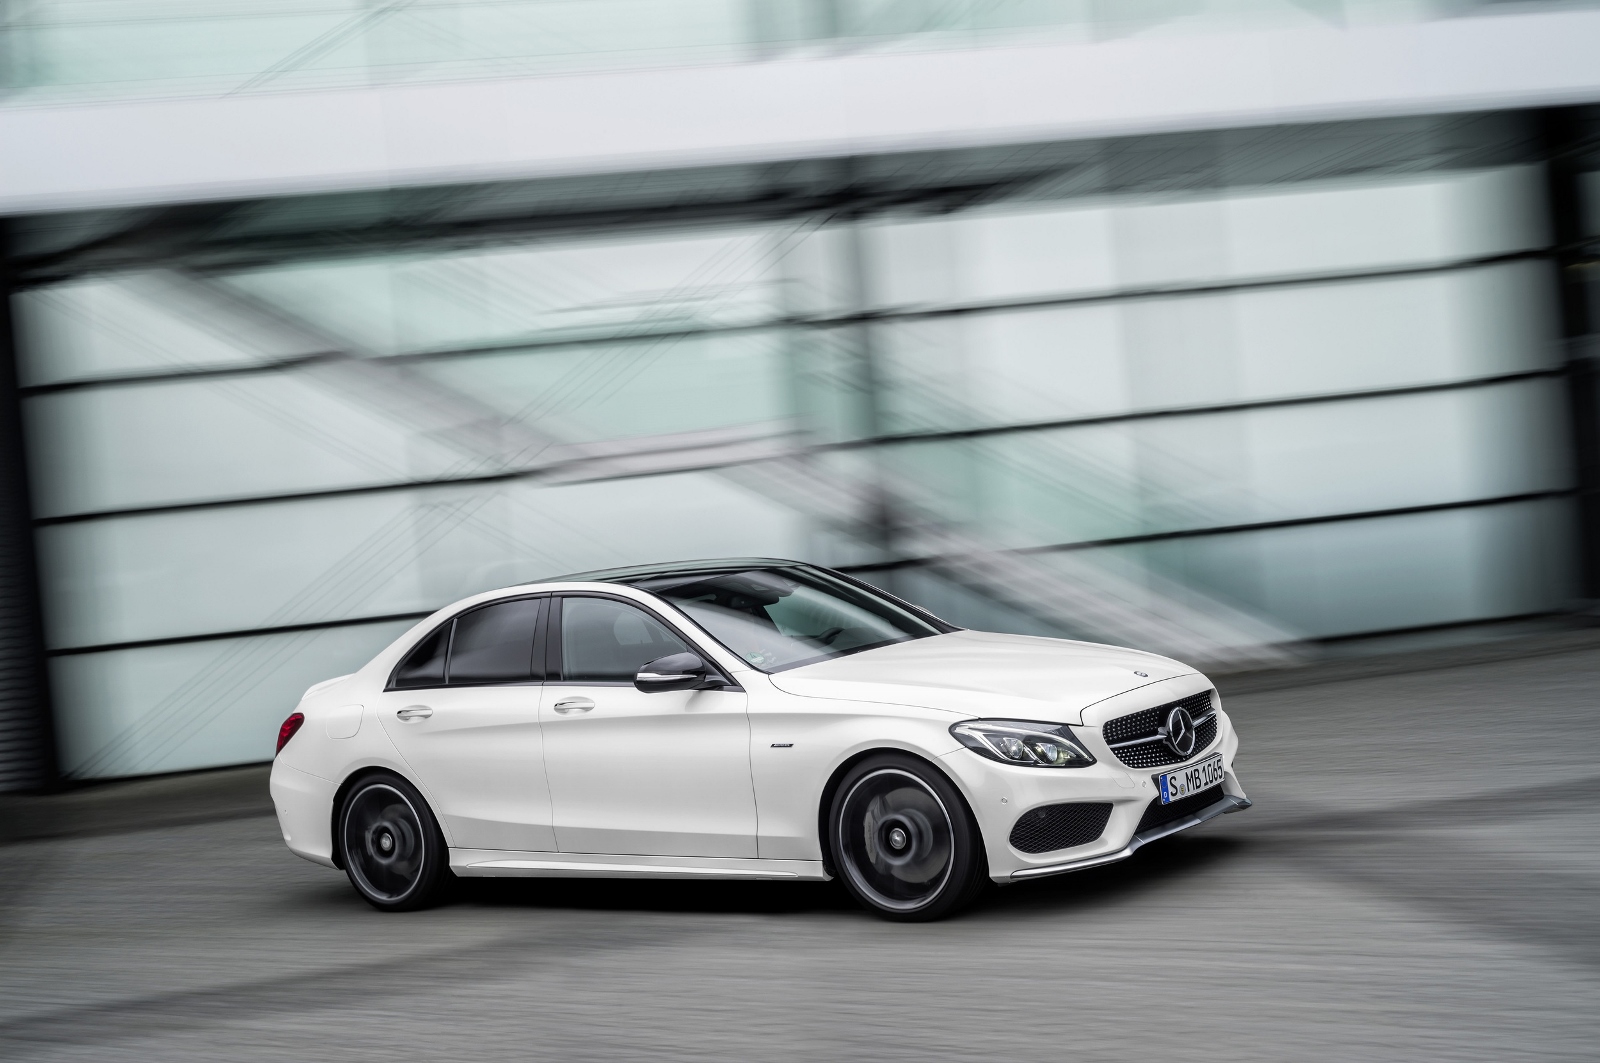 Mercedes-Benz C450 AMG Sport Is One Fast Poser - Page 3 -  Forums